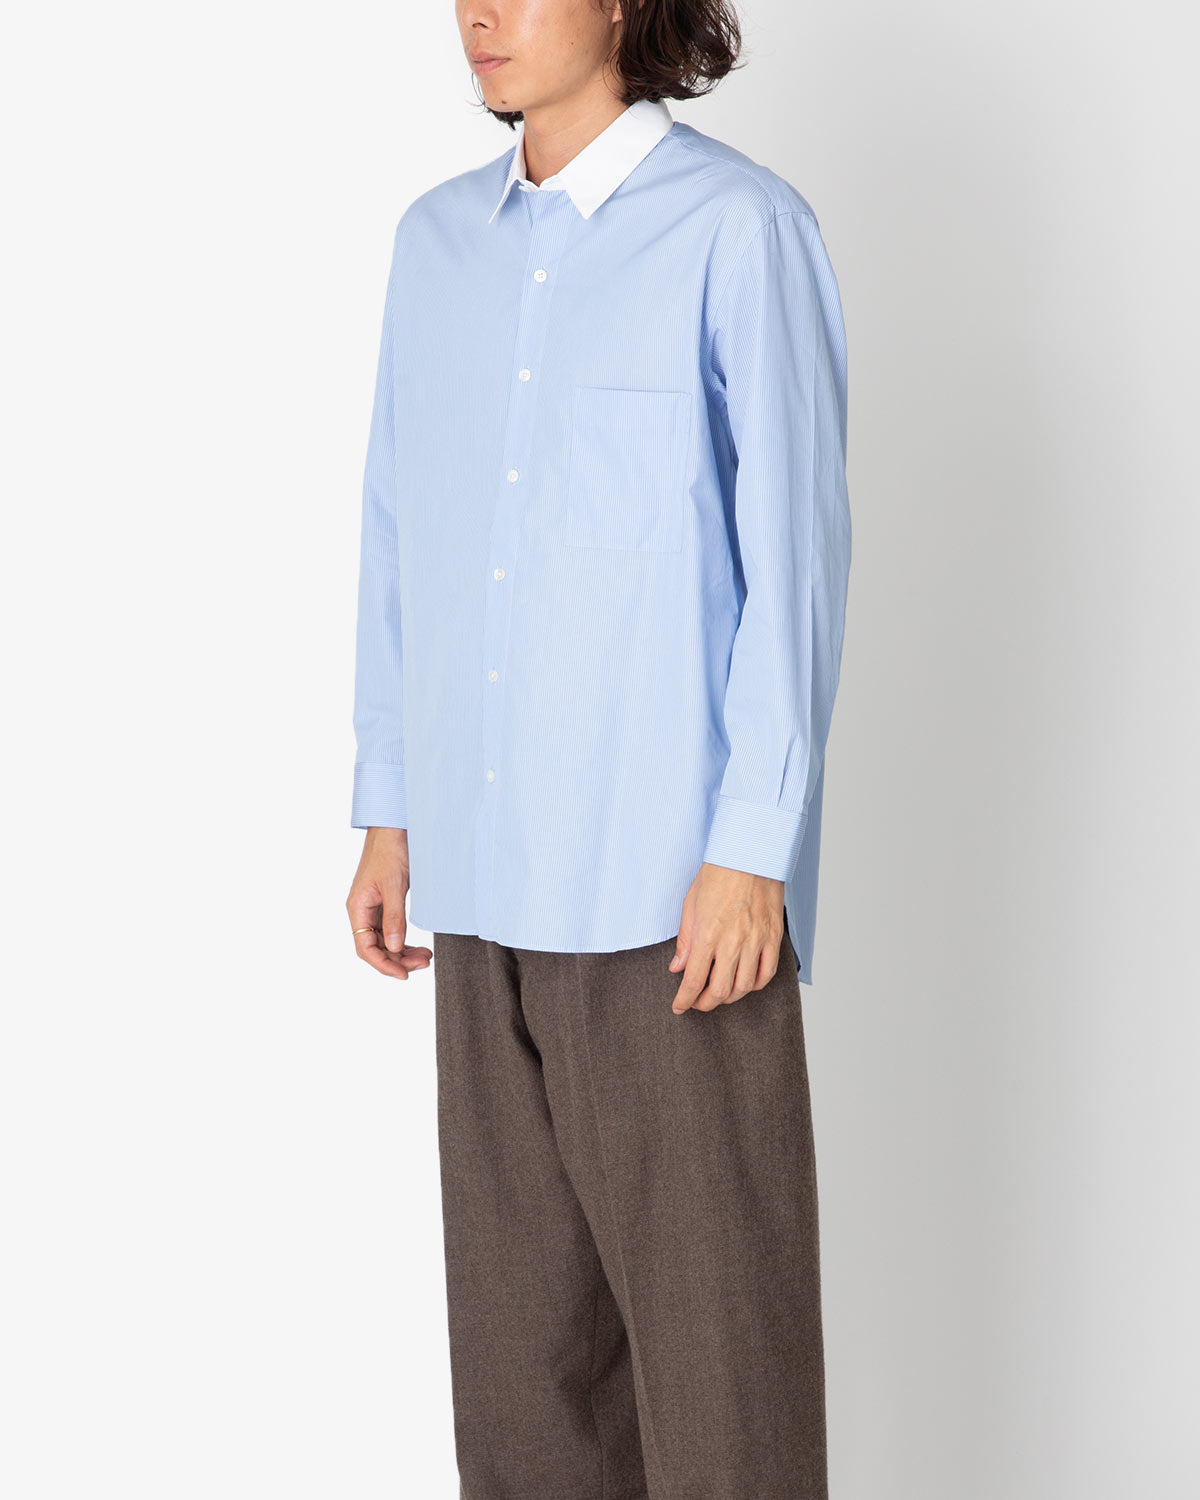 HANDMADE POPELINE MEN’S SHIRT WITH CONTRASTED COLLAR